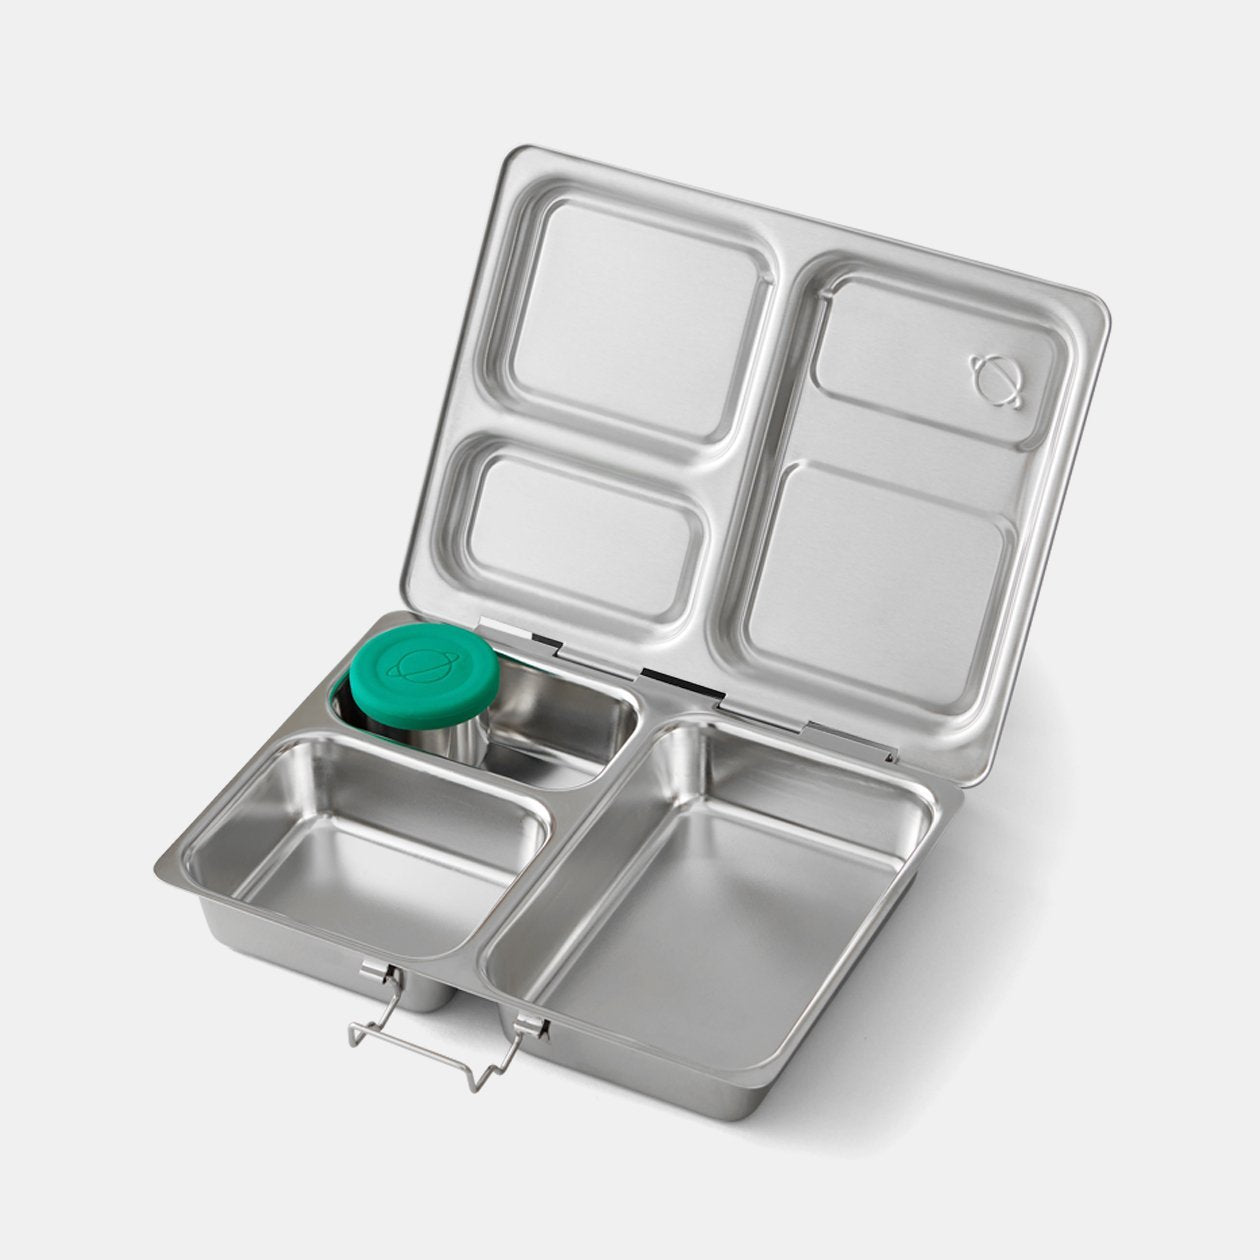 PlanetBox Stainless Steel Lunchbox  Launch - Urban Naturals